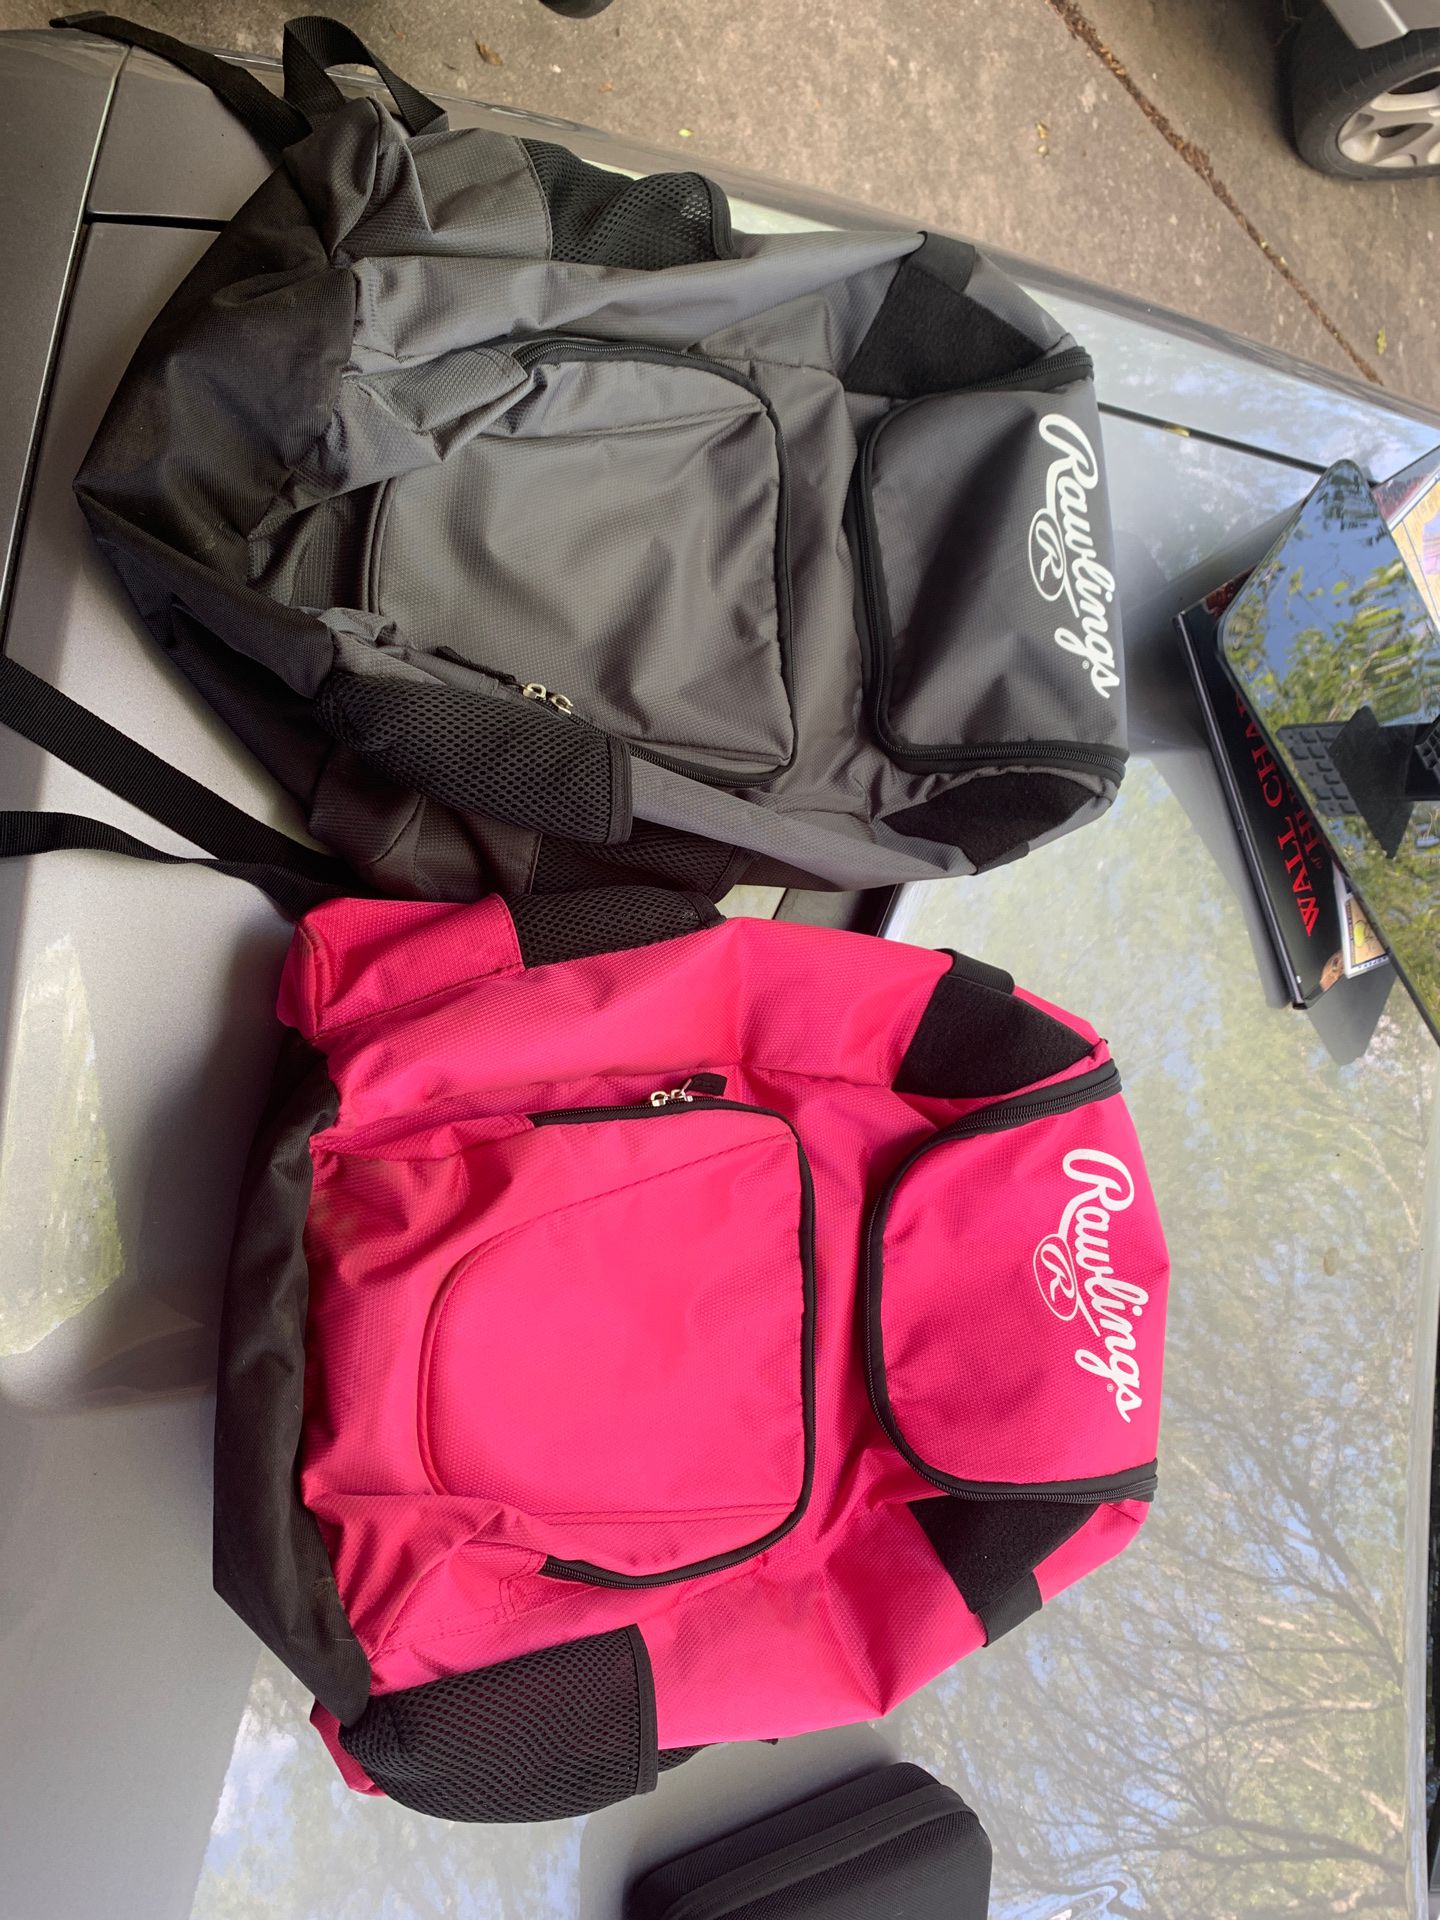 Rawlings his and hers softball backpack